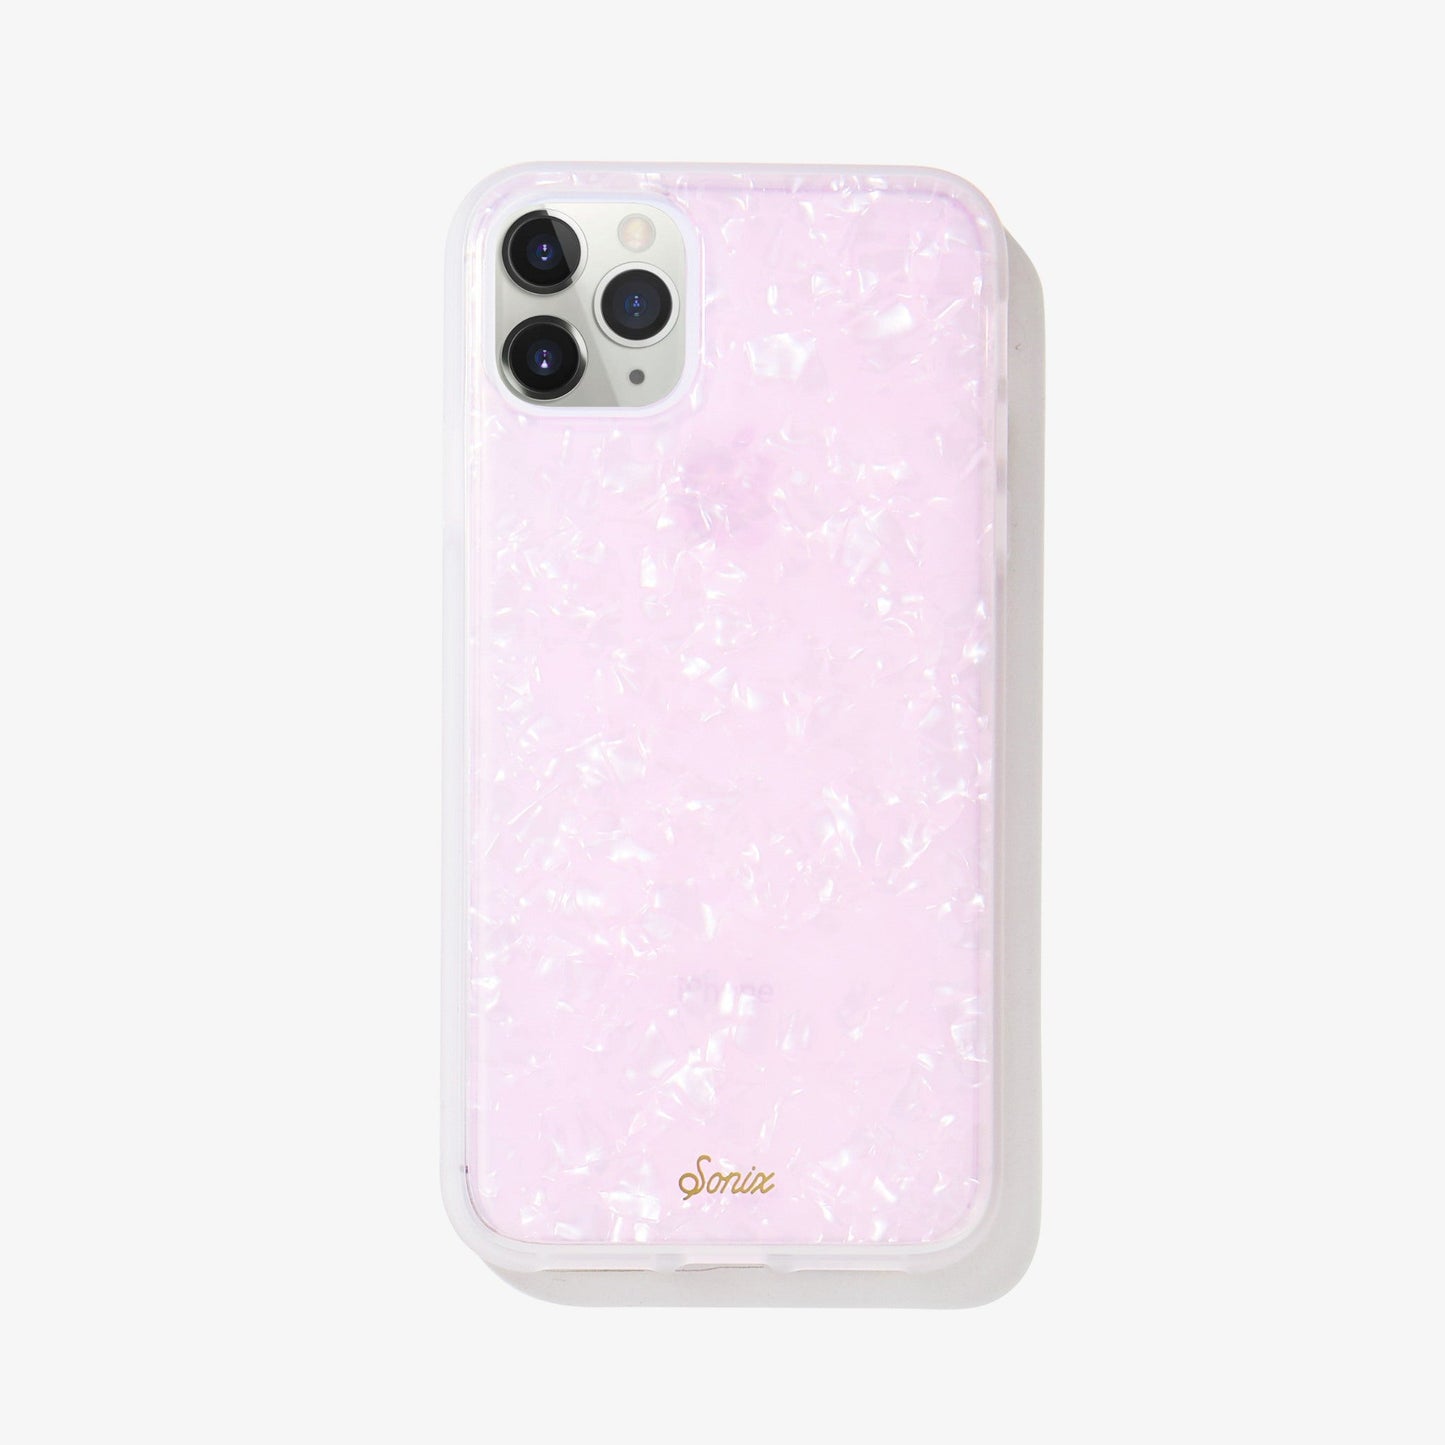 pink tort design with a shine that gleams in the light shown on an iphone 11 pro max